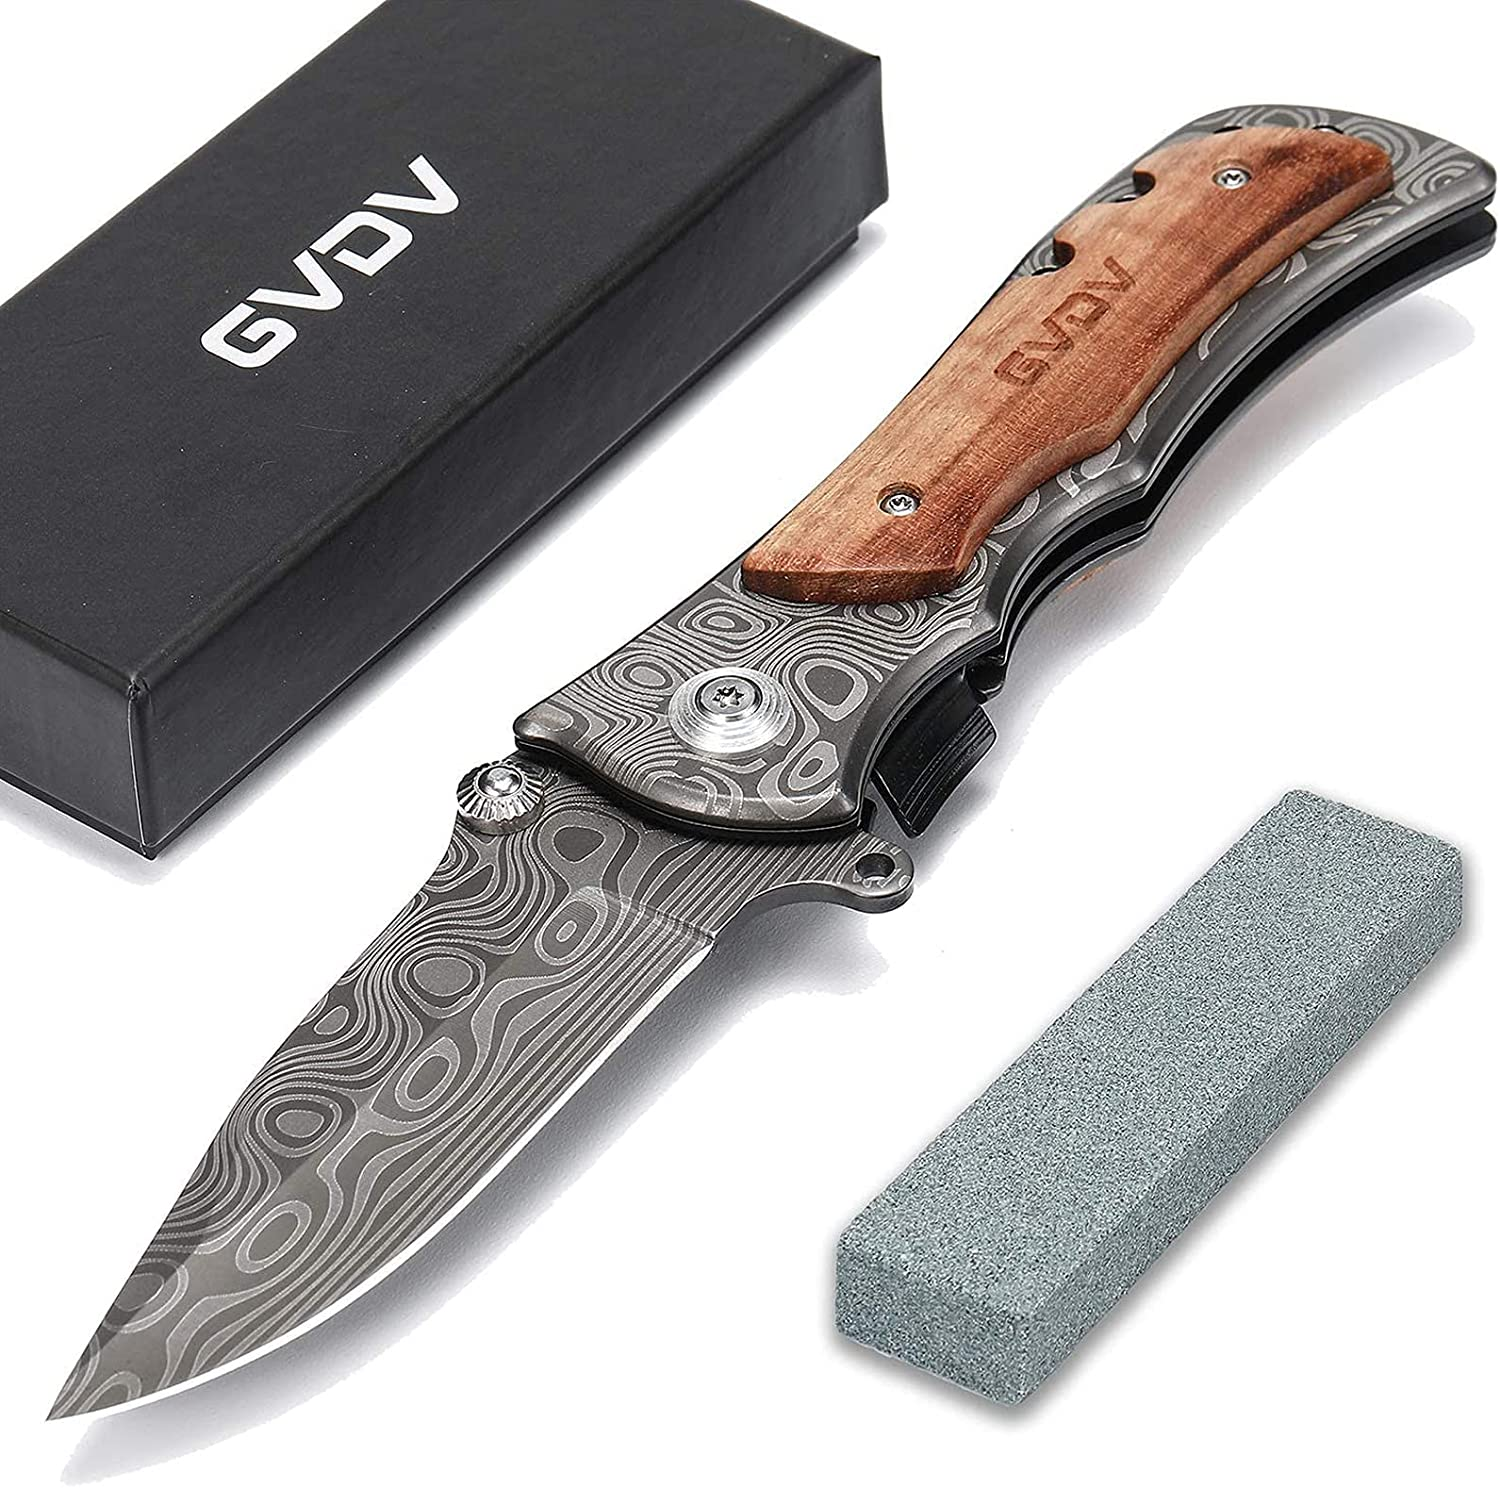 Folding Knife with 7Cr17 Stainless Steel